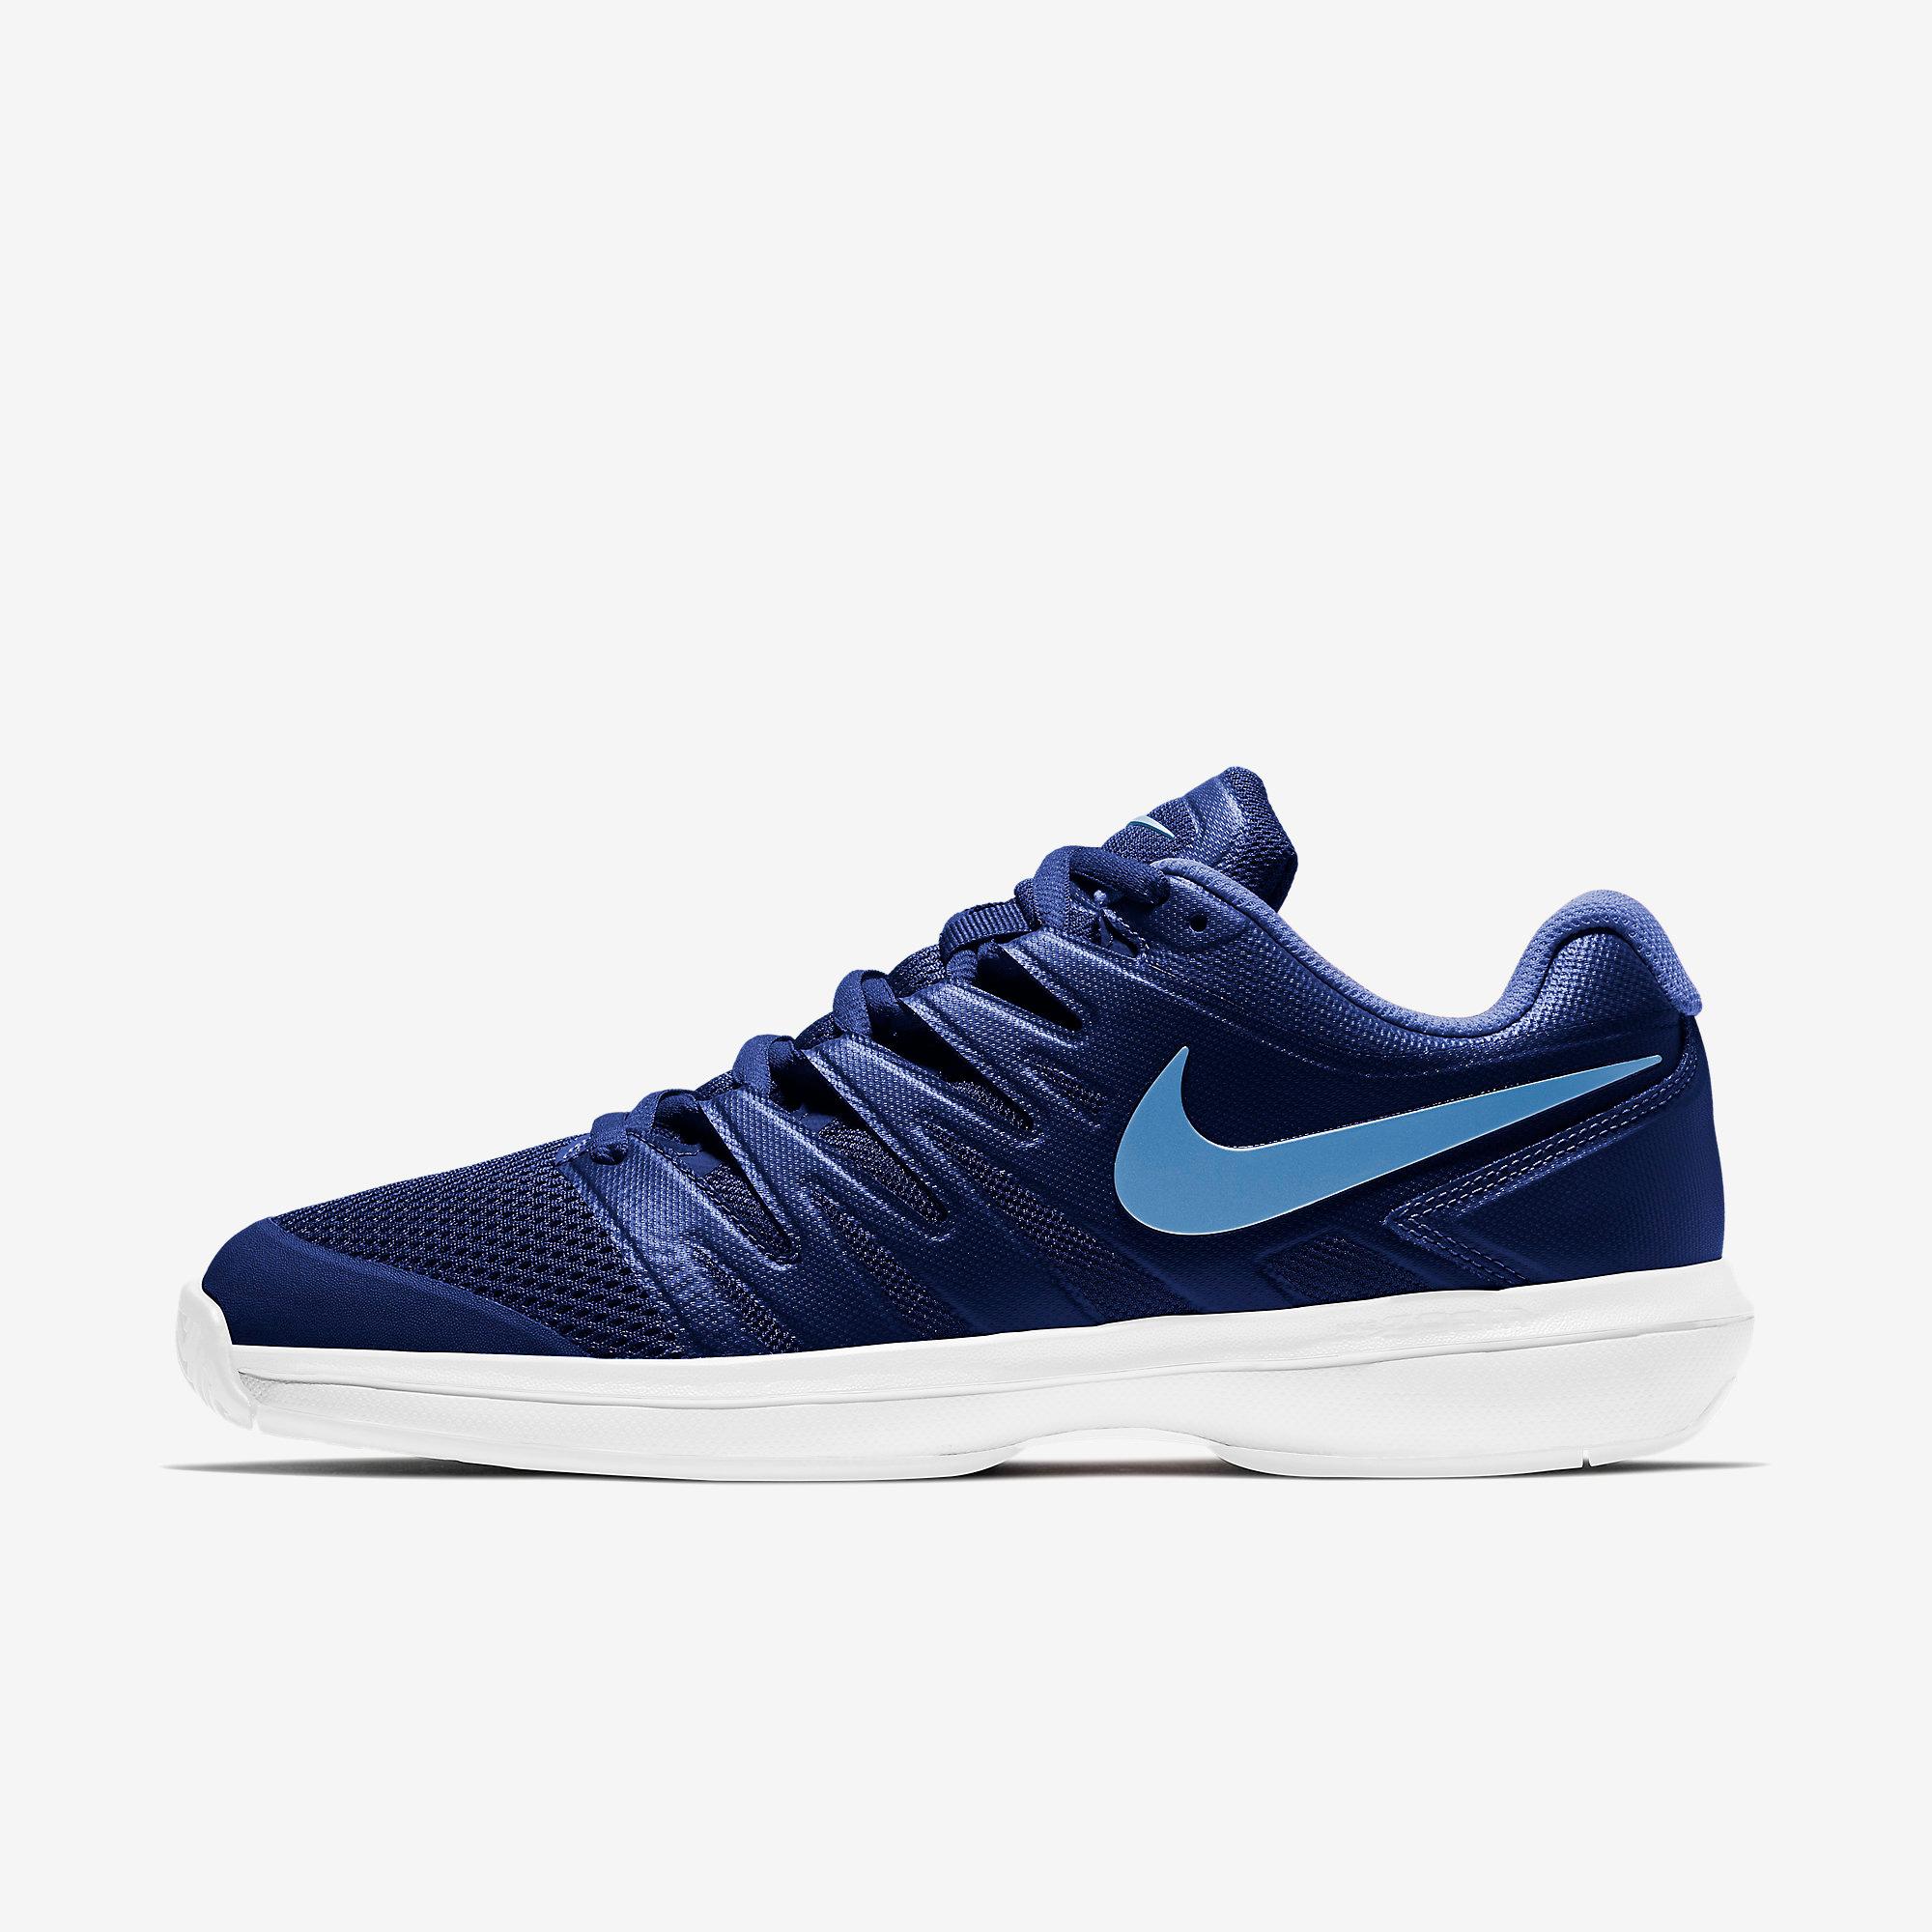 royal blue and white tennis shoes